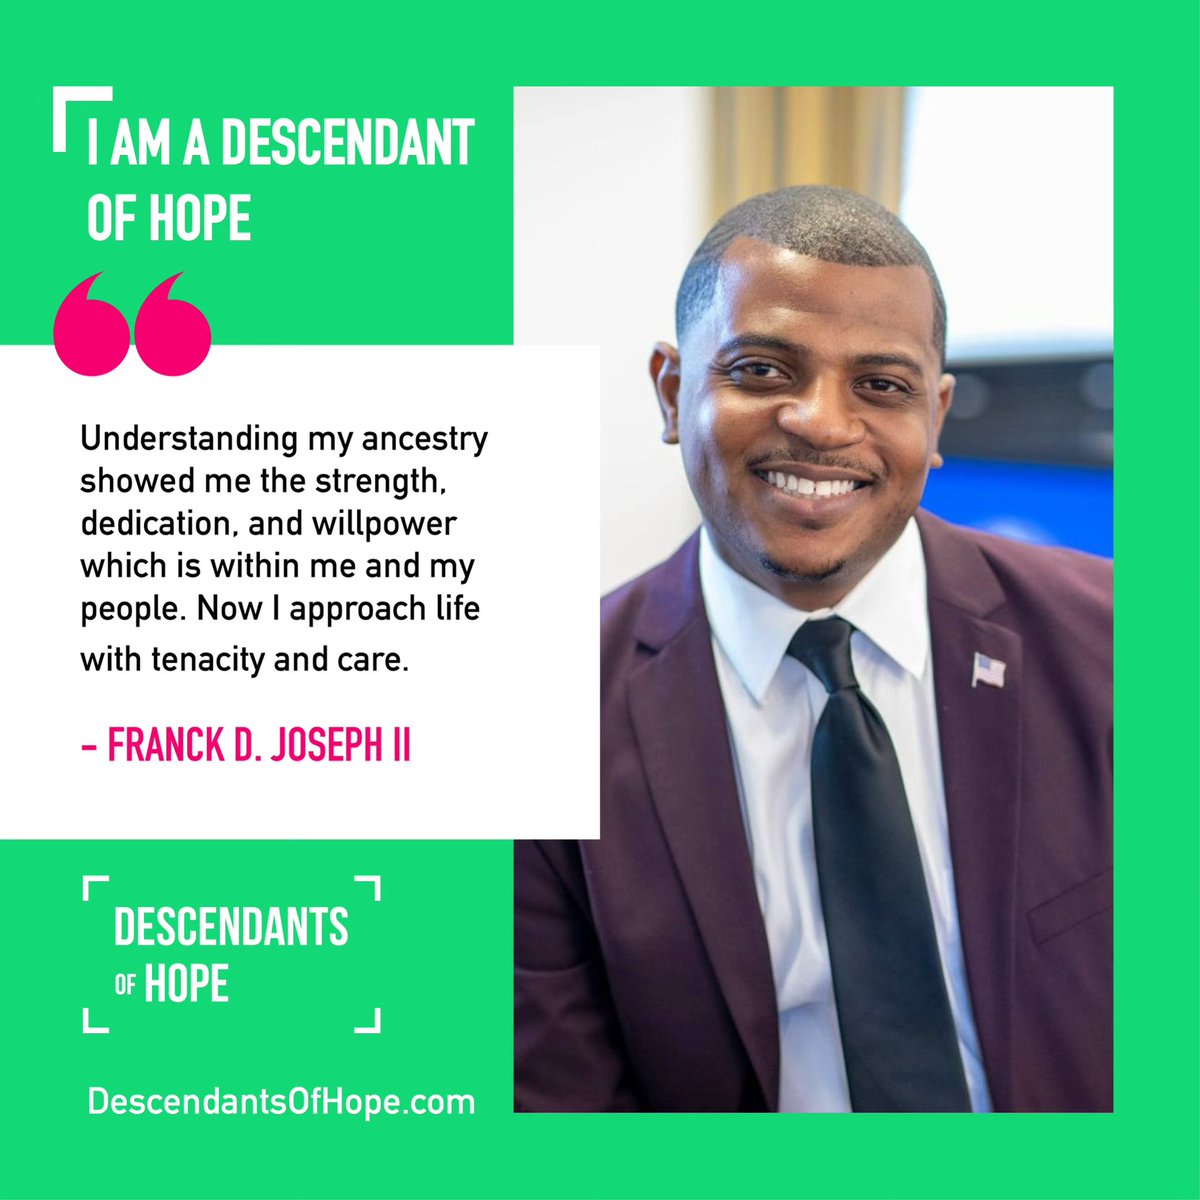 Meet Franck D. Joseph II, a son of Haitian🇭🇹 immigrants and today’s #FeatureFriday Descendant Of Hope!